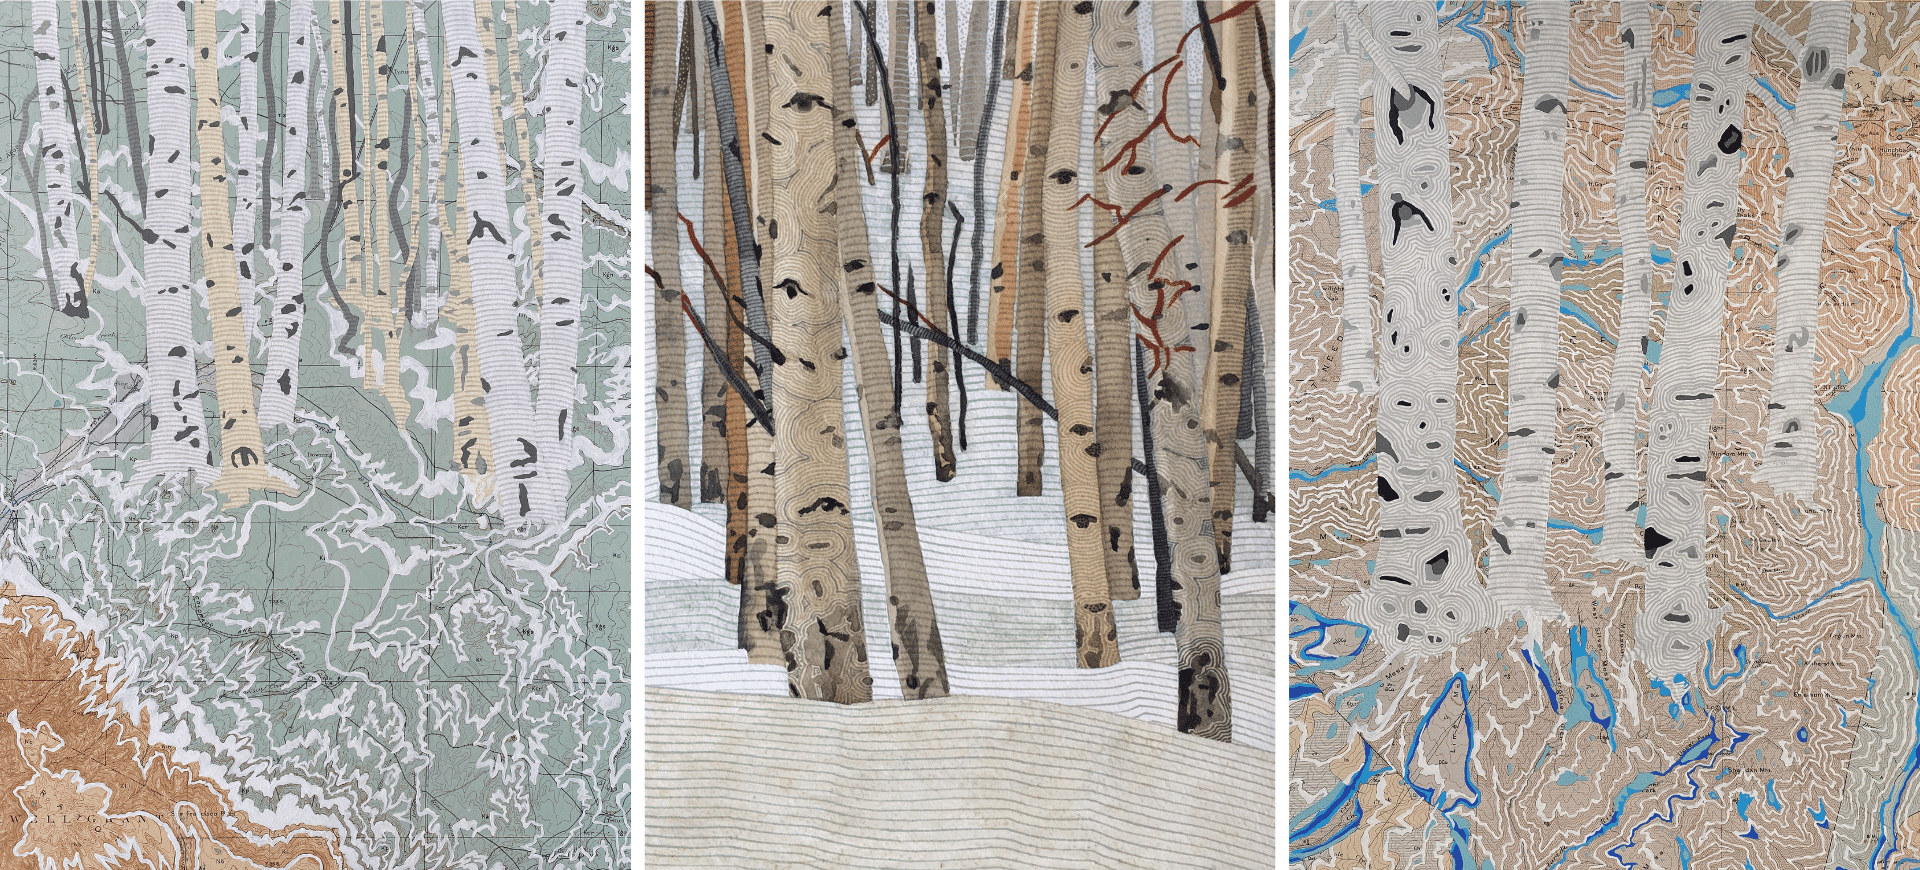 Three paintings of trees over a map; the rivers on the map have all been painted a deeper blue.